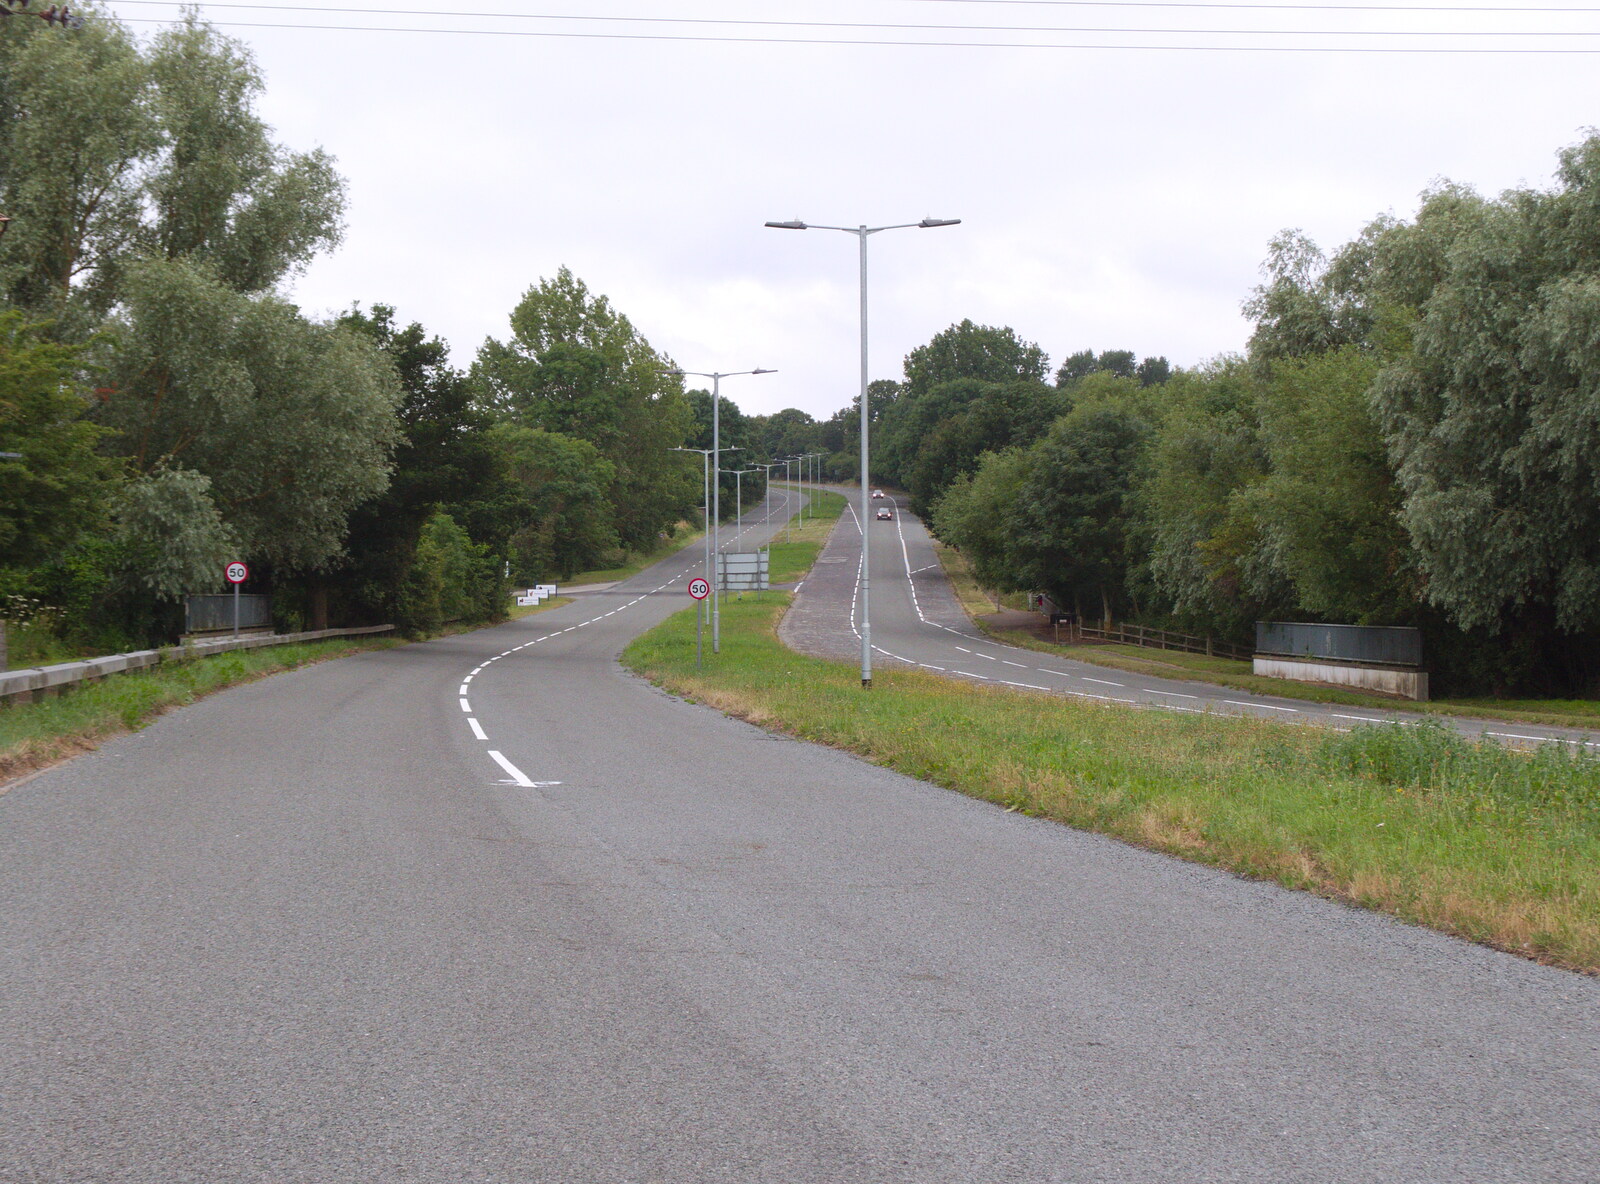 The old A12 London Road in Washbrook from A Postcard from Boxford and BSCC at Pulham, Suffolk and Norfolk - 13th July 2019